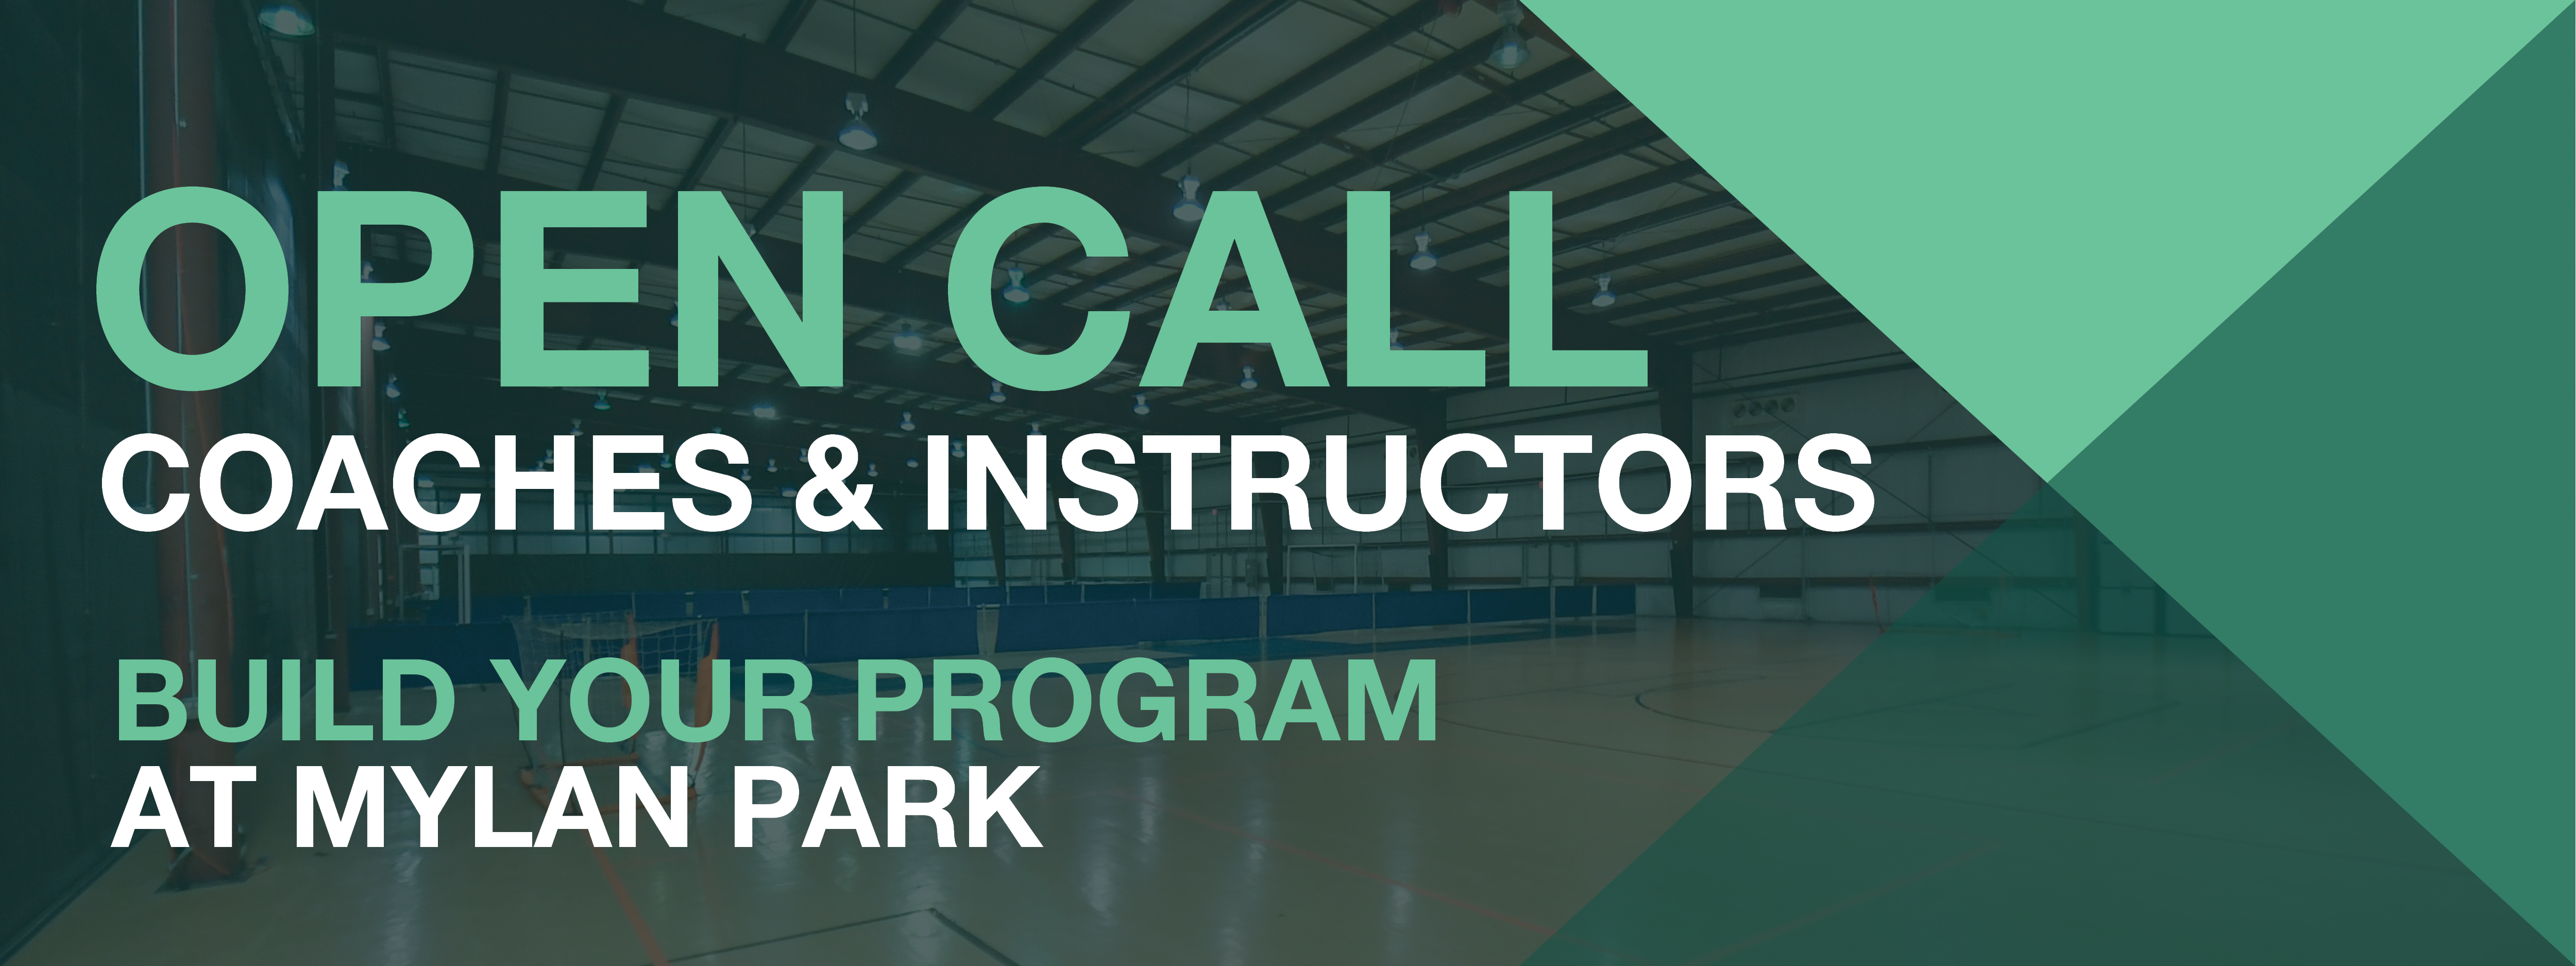 Open call for coaches & instructors! Build your program at Mylan Park. Call (304) 973 - 9733 today!